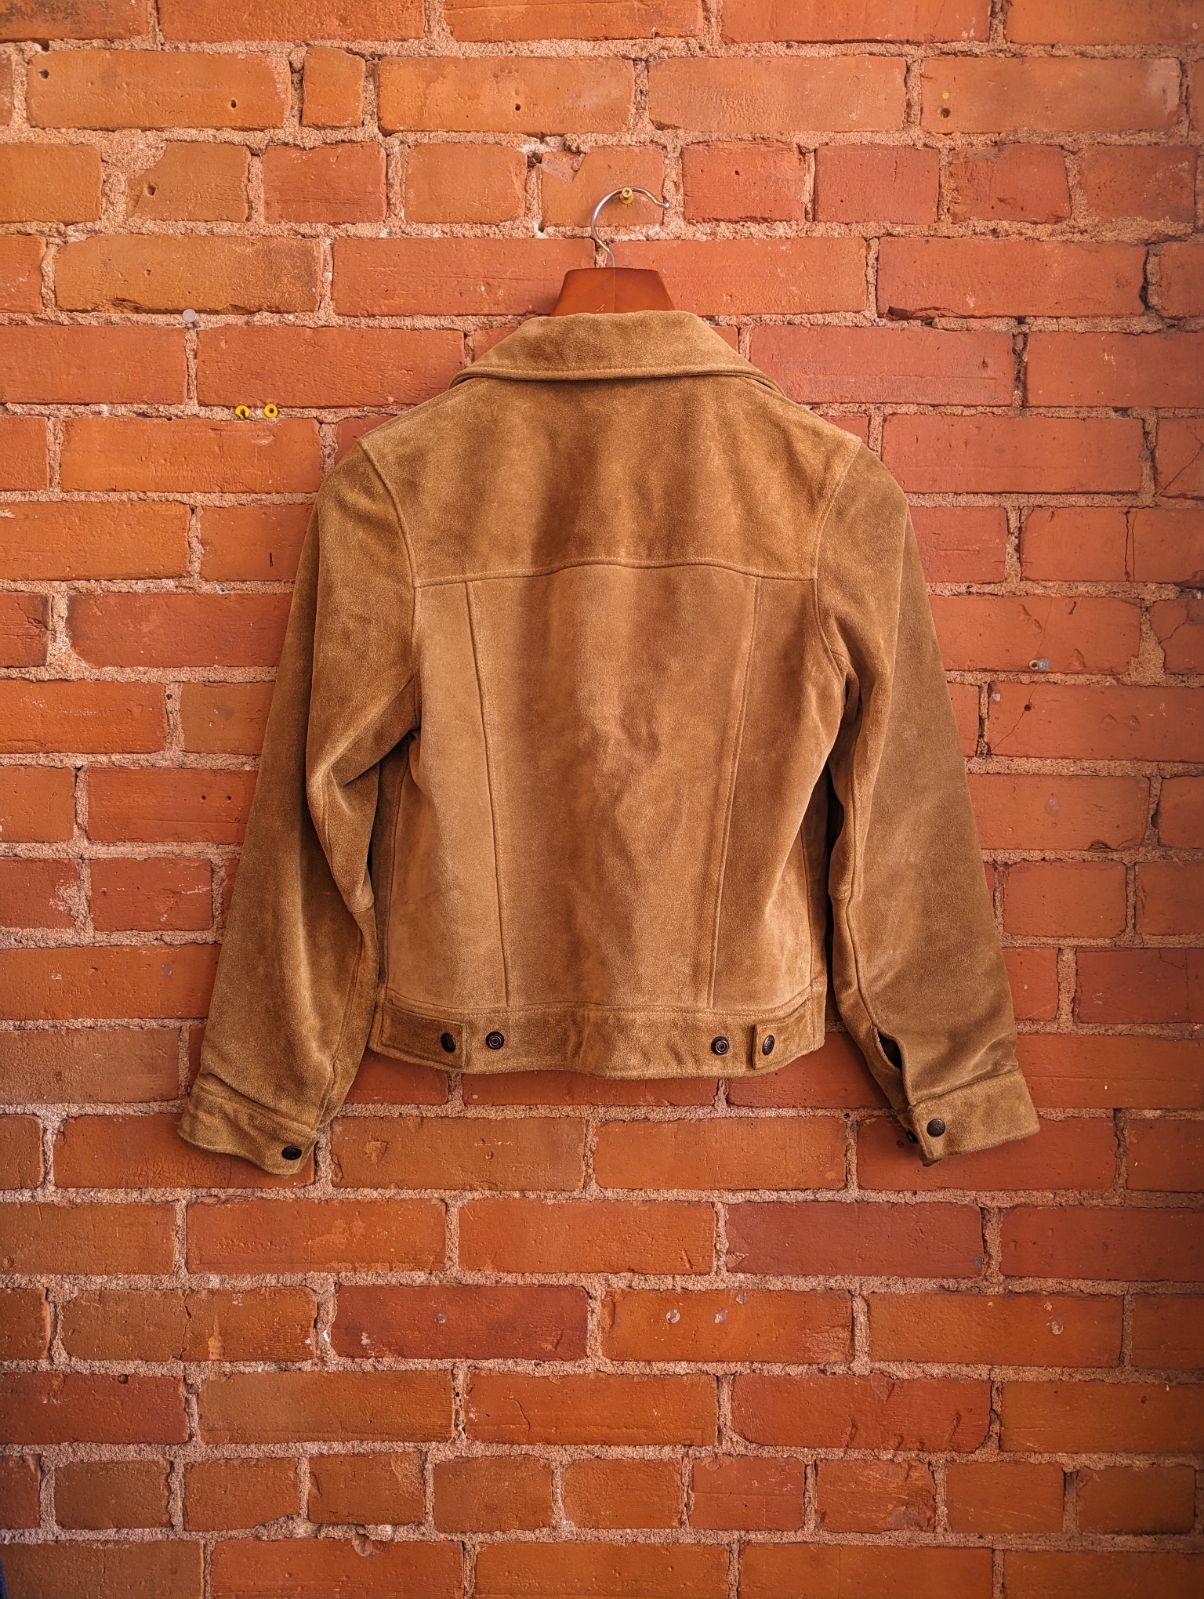 1990s Roots Brand New With Tags Tan Suede Jacket